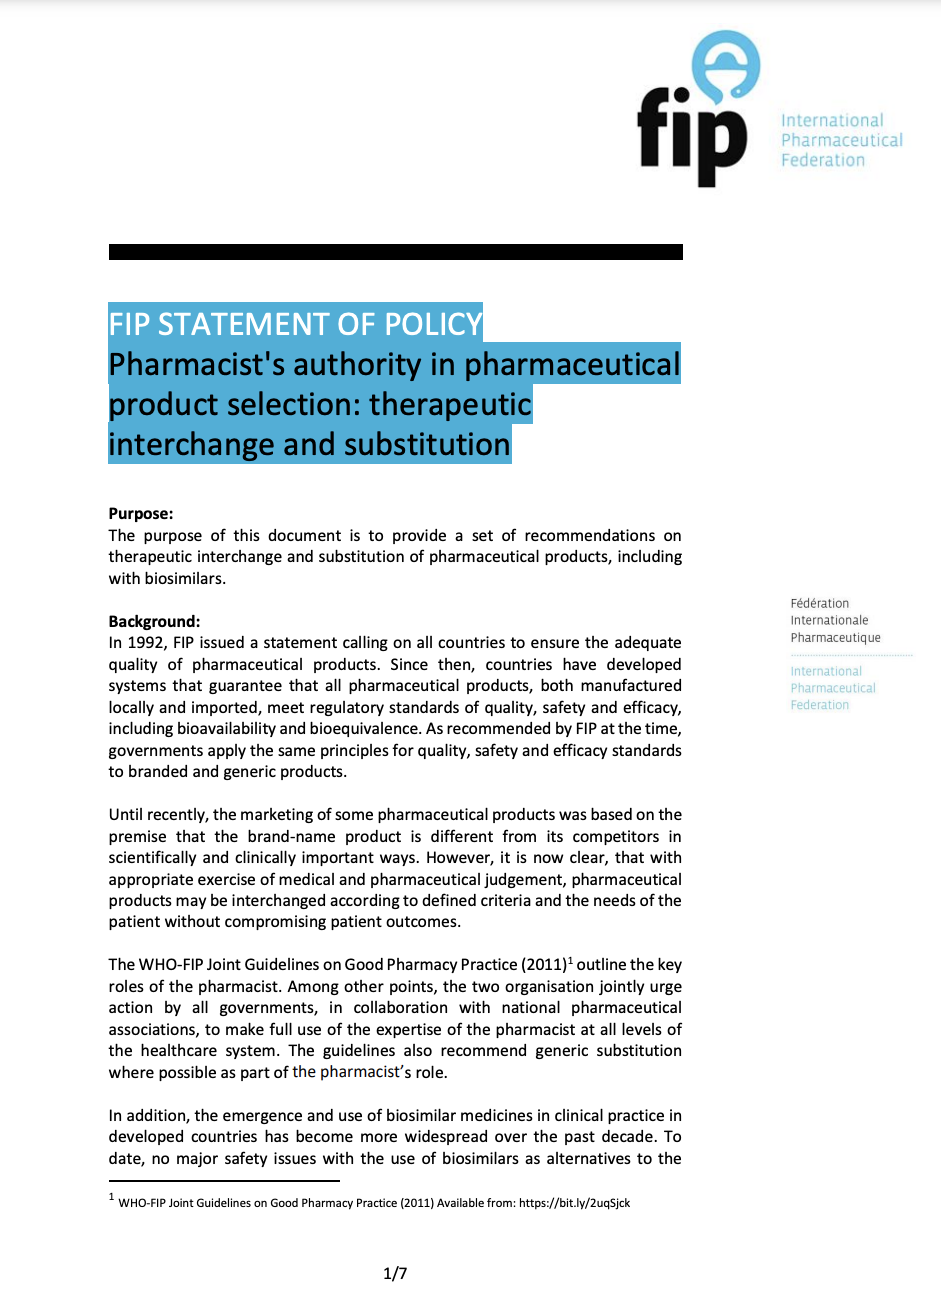 FIP Statement of Policy: Pharmacist's authority in pharmaceutical product selection: therapeutic interchange and substitution (2018) Thumbnail